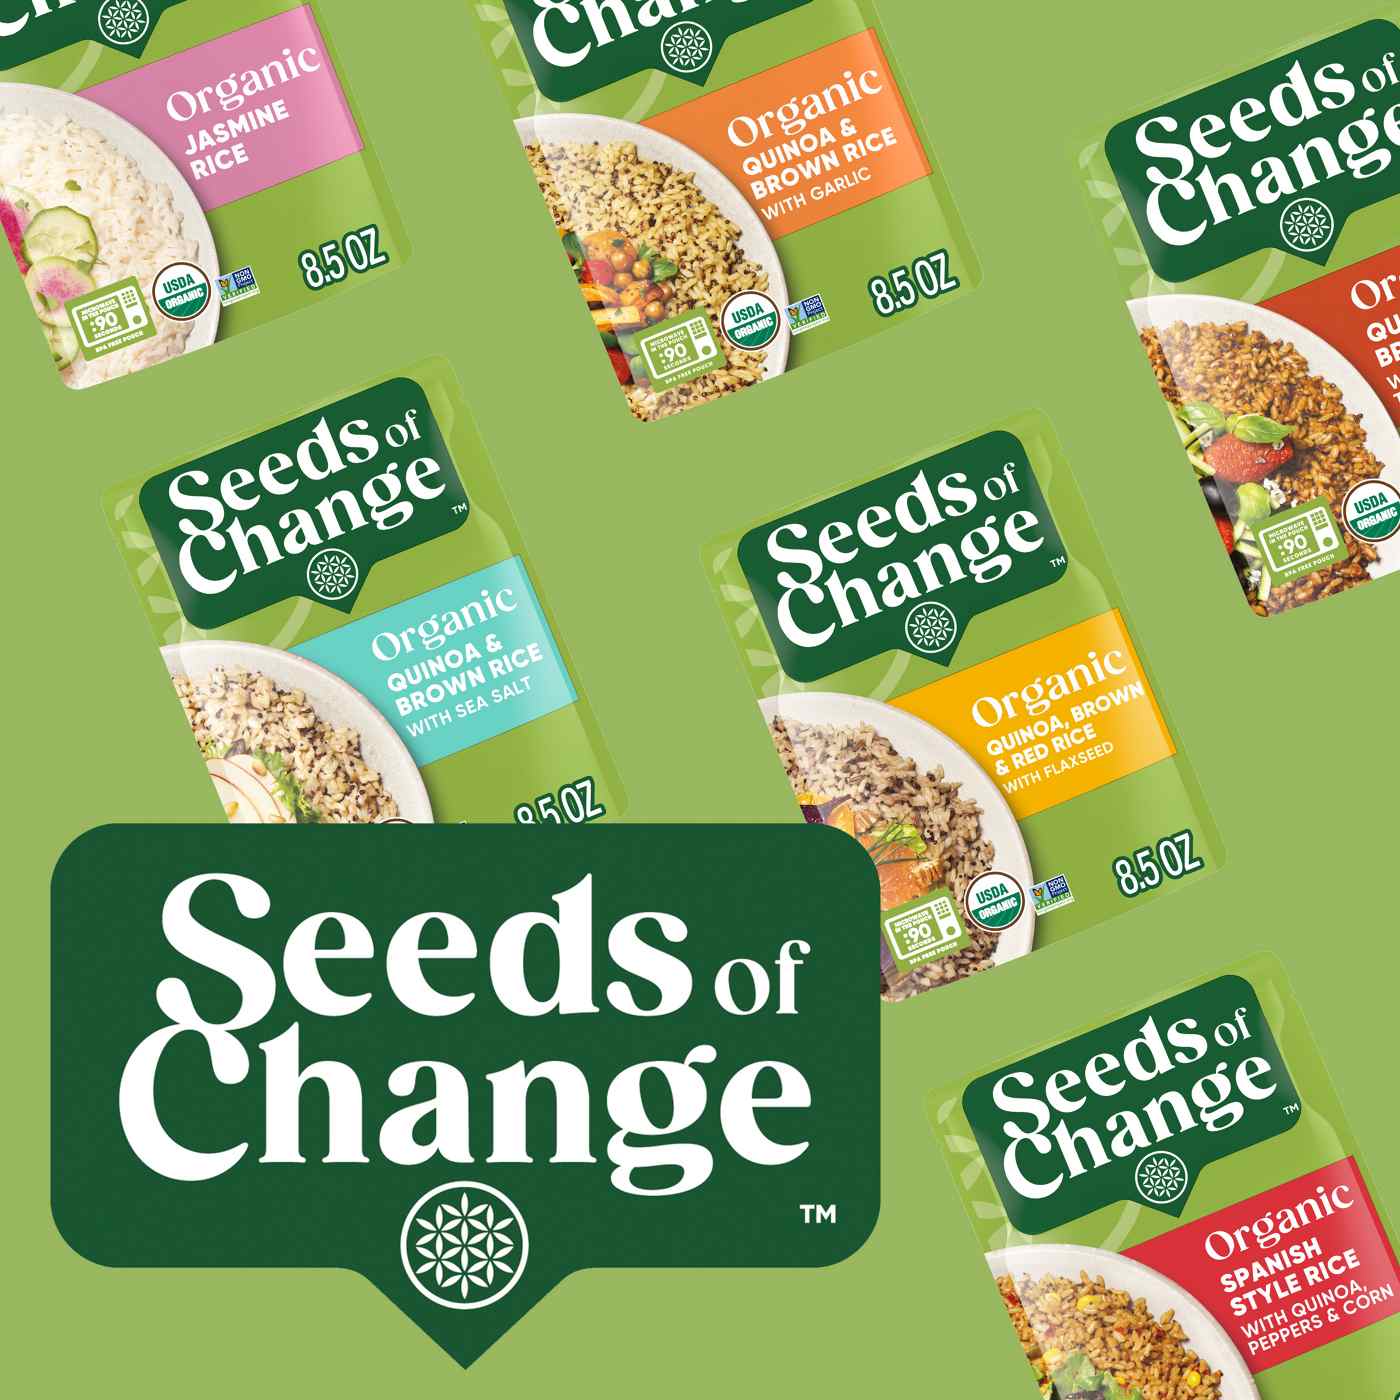 Seeds of Change Organic Brown Jasmine Rice with Cilantro Lime; image 4 of 9